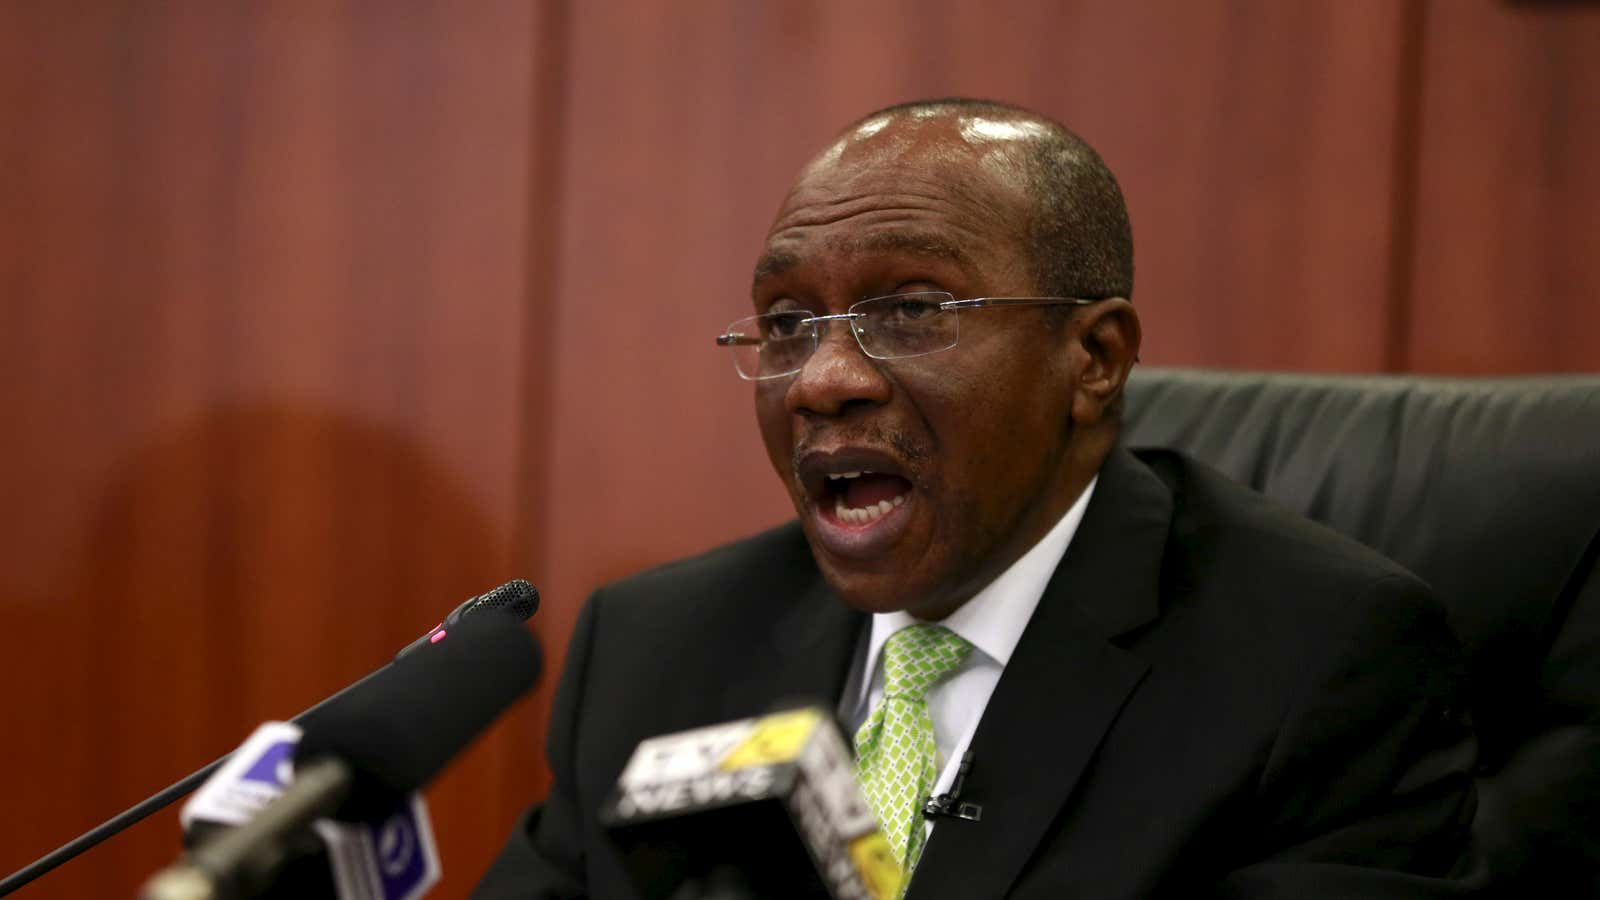 Nigeria risks being blacklisted by global finance bodies over allegations against Emefiele